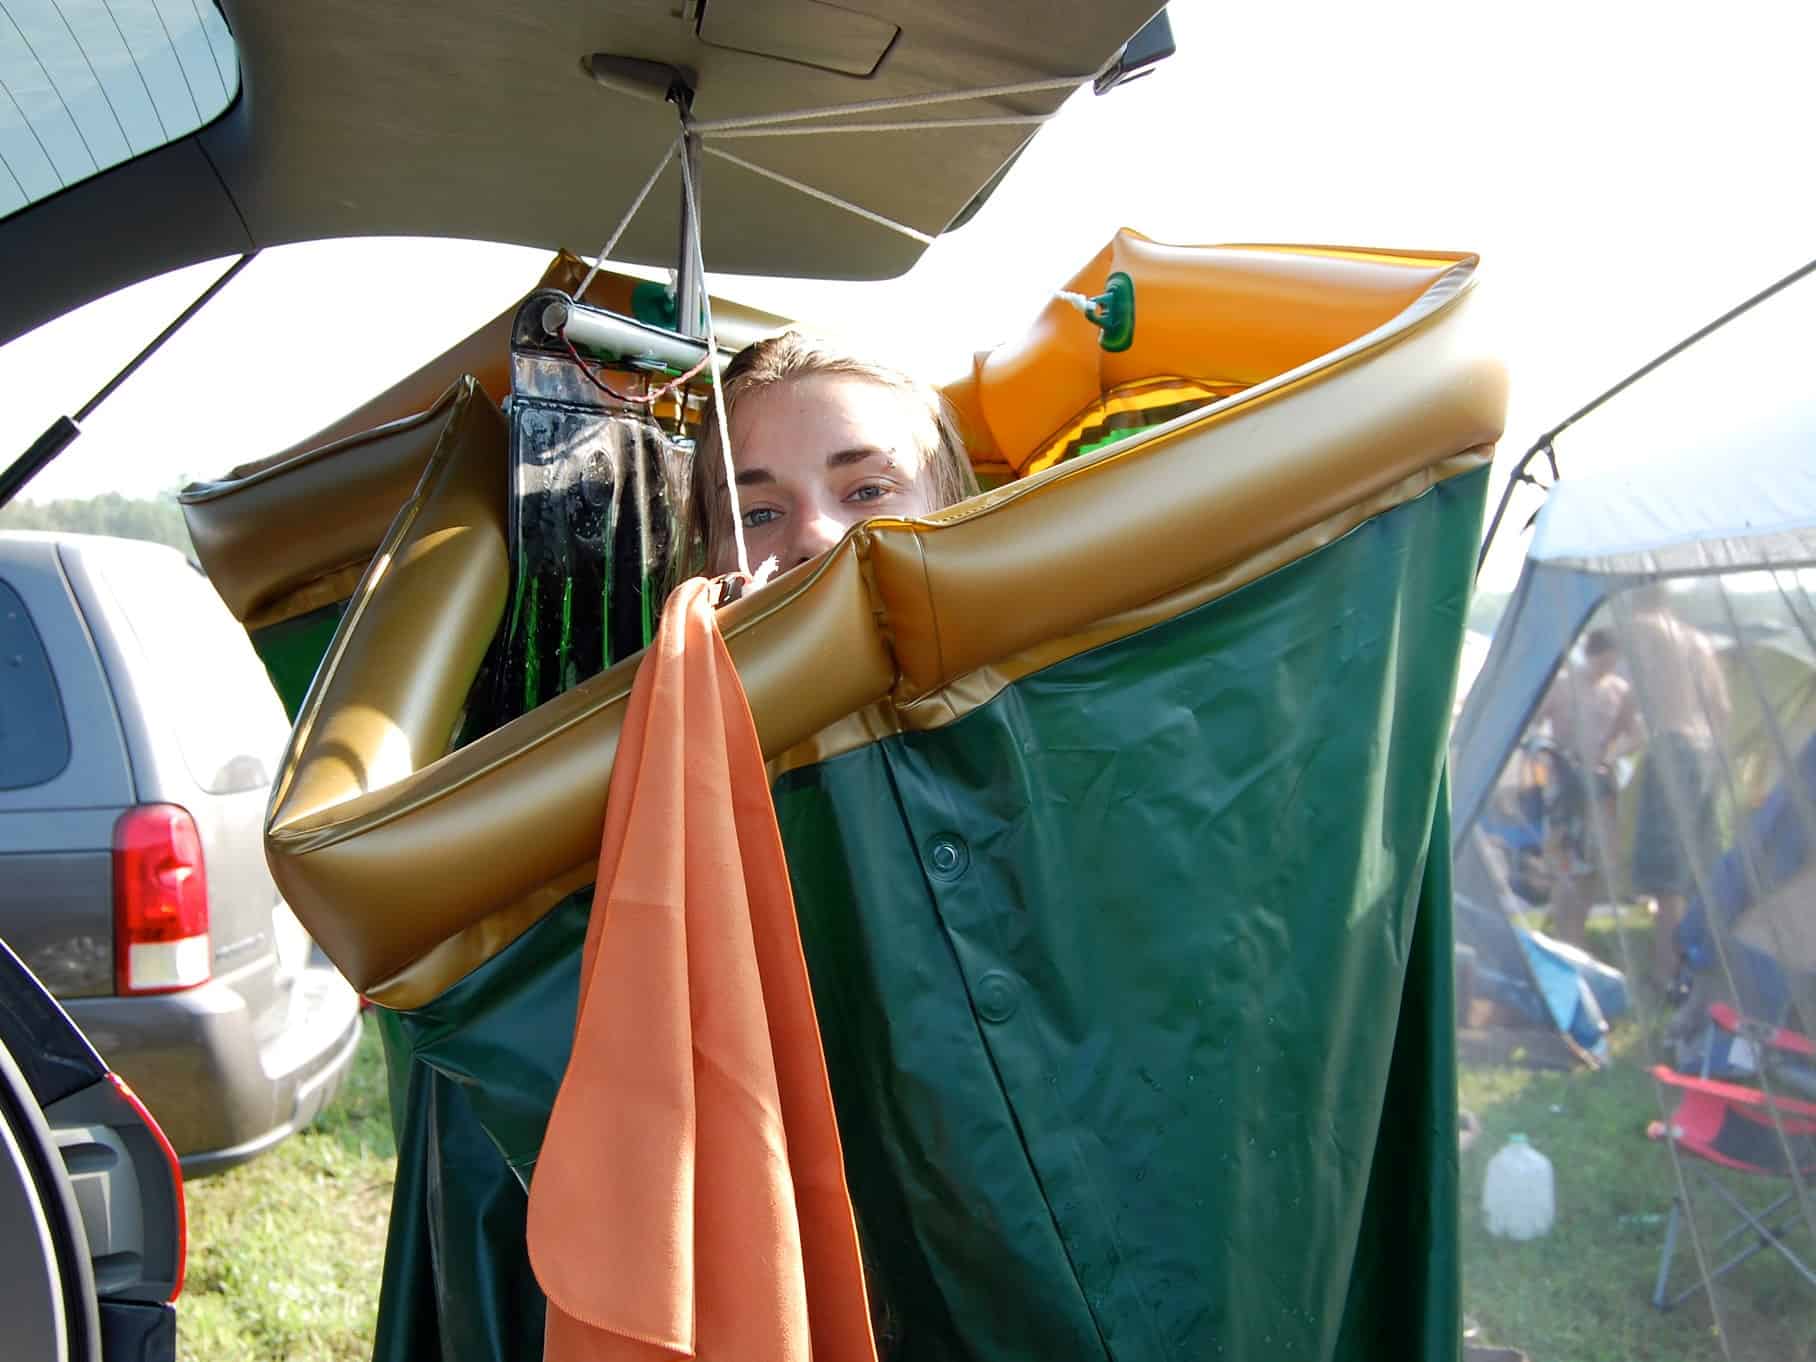 Best portable shower for Camping